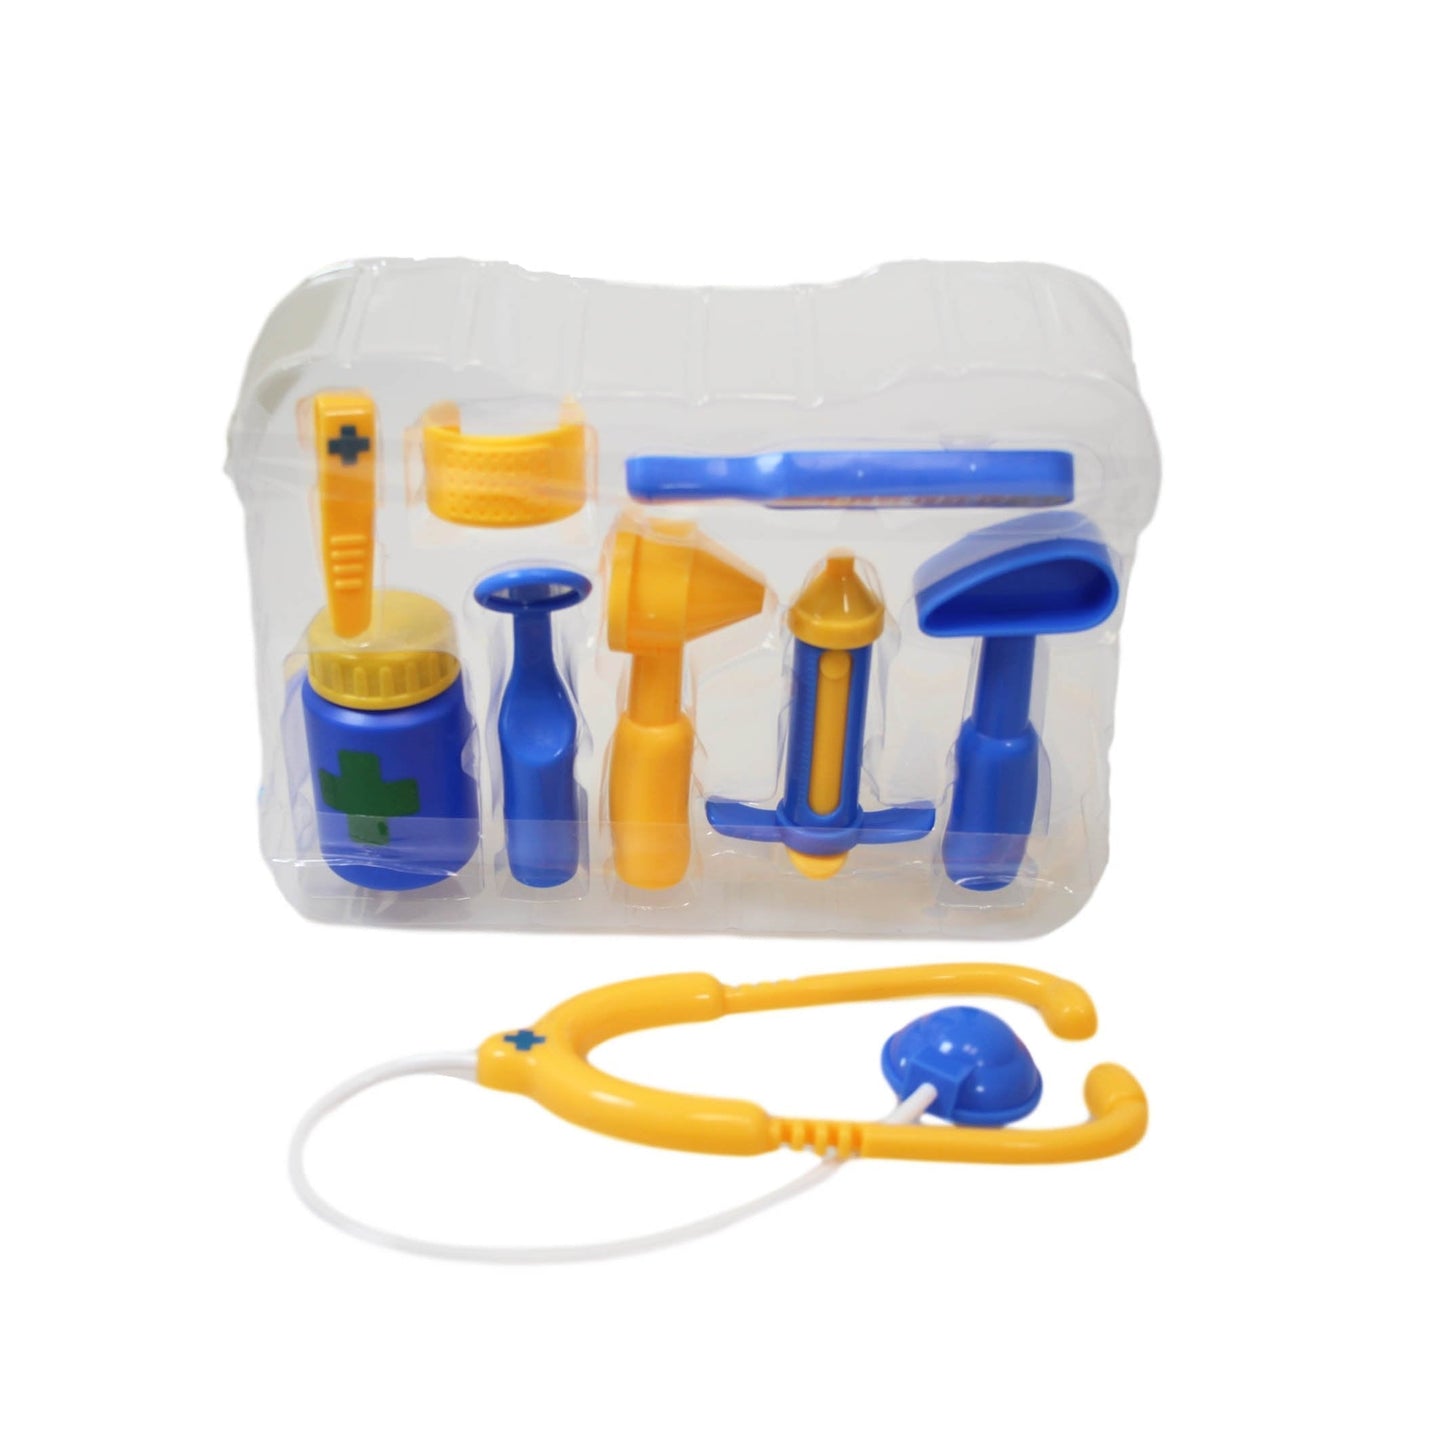 Smart Medical Case Young Child Doctor Includes Full Set in Briefcase Toy 25cm x 20cm 1684302 (Parcel Rate)